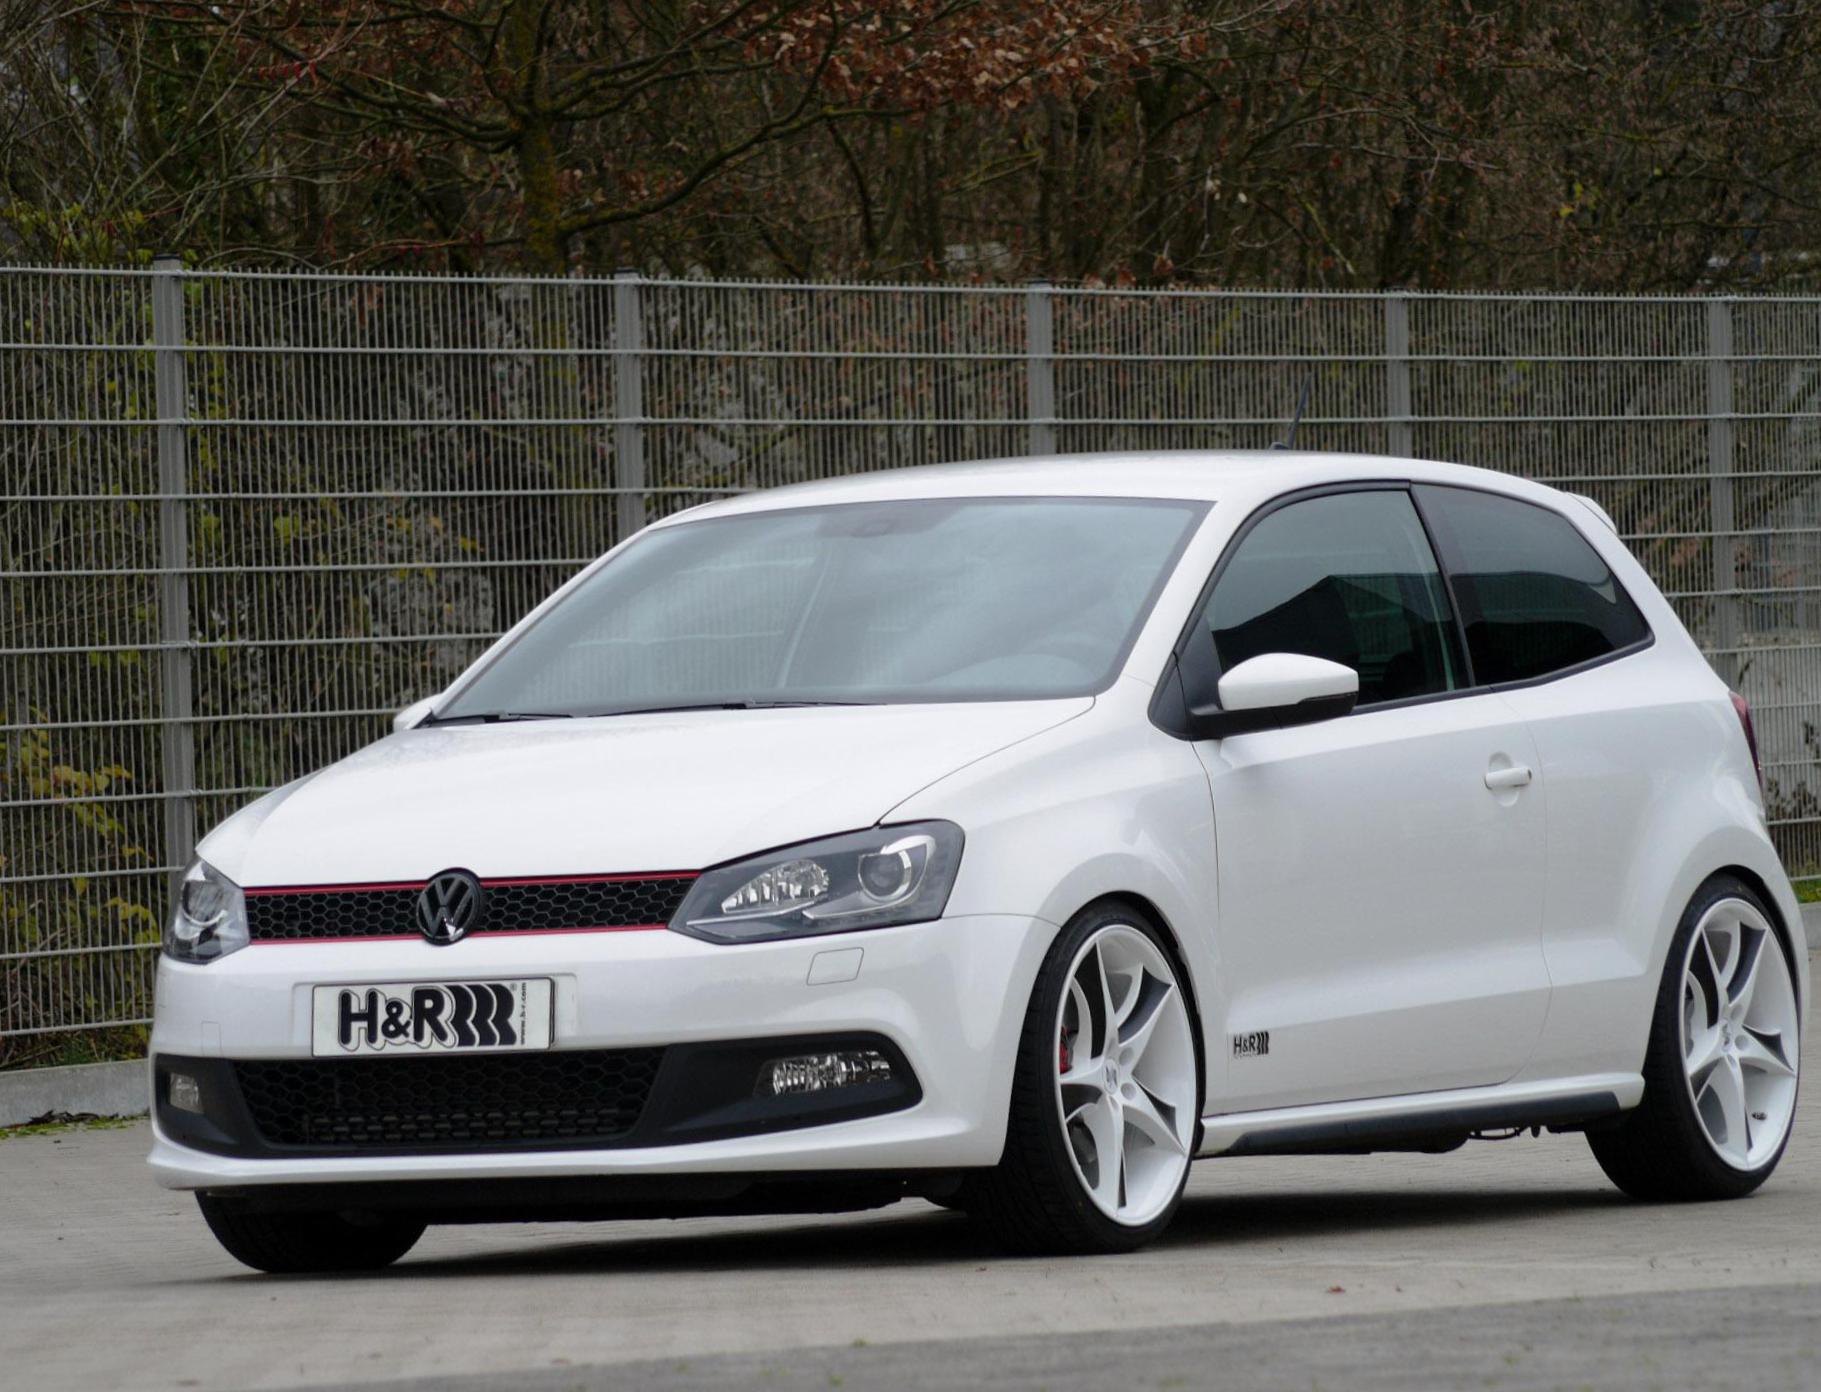 Volkswagen Polo GTI Photos and Specs. Photo: Volkswagen Polo GTI how ...